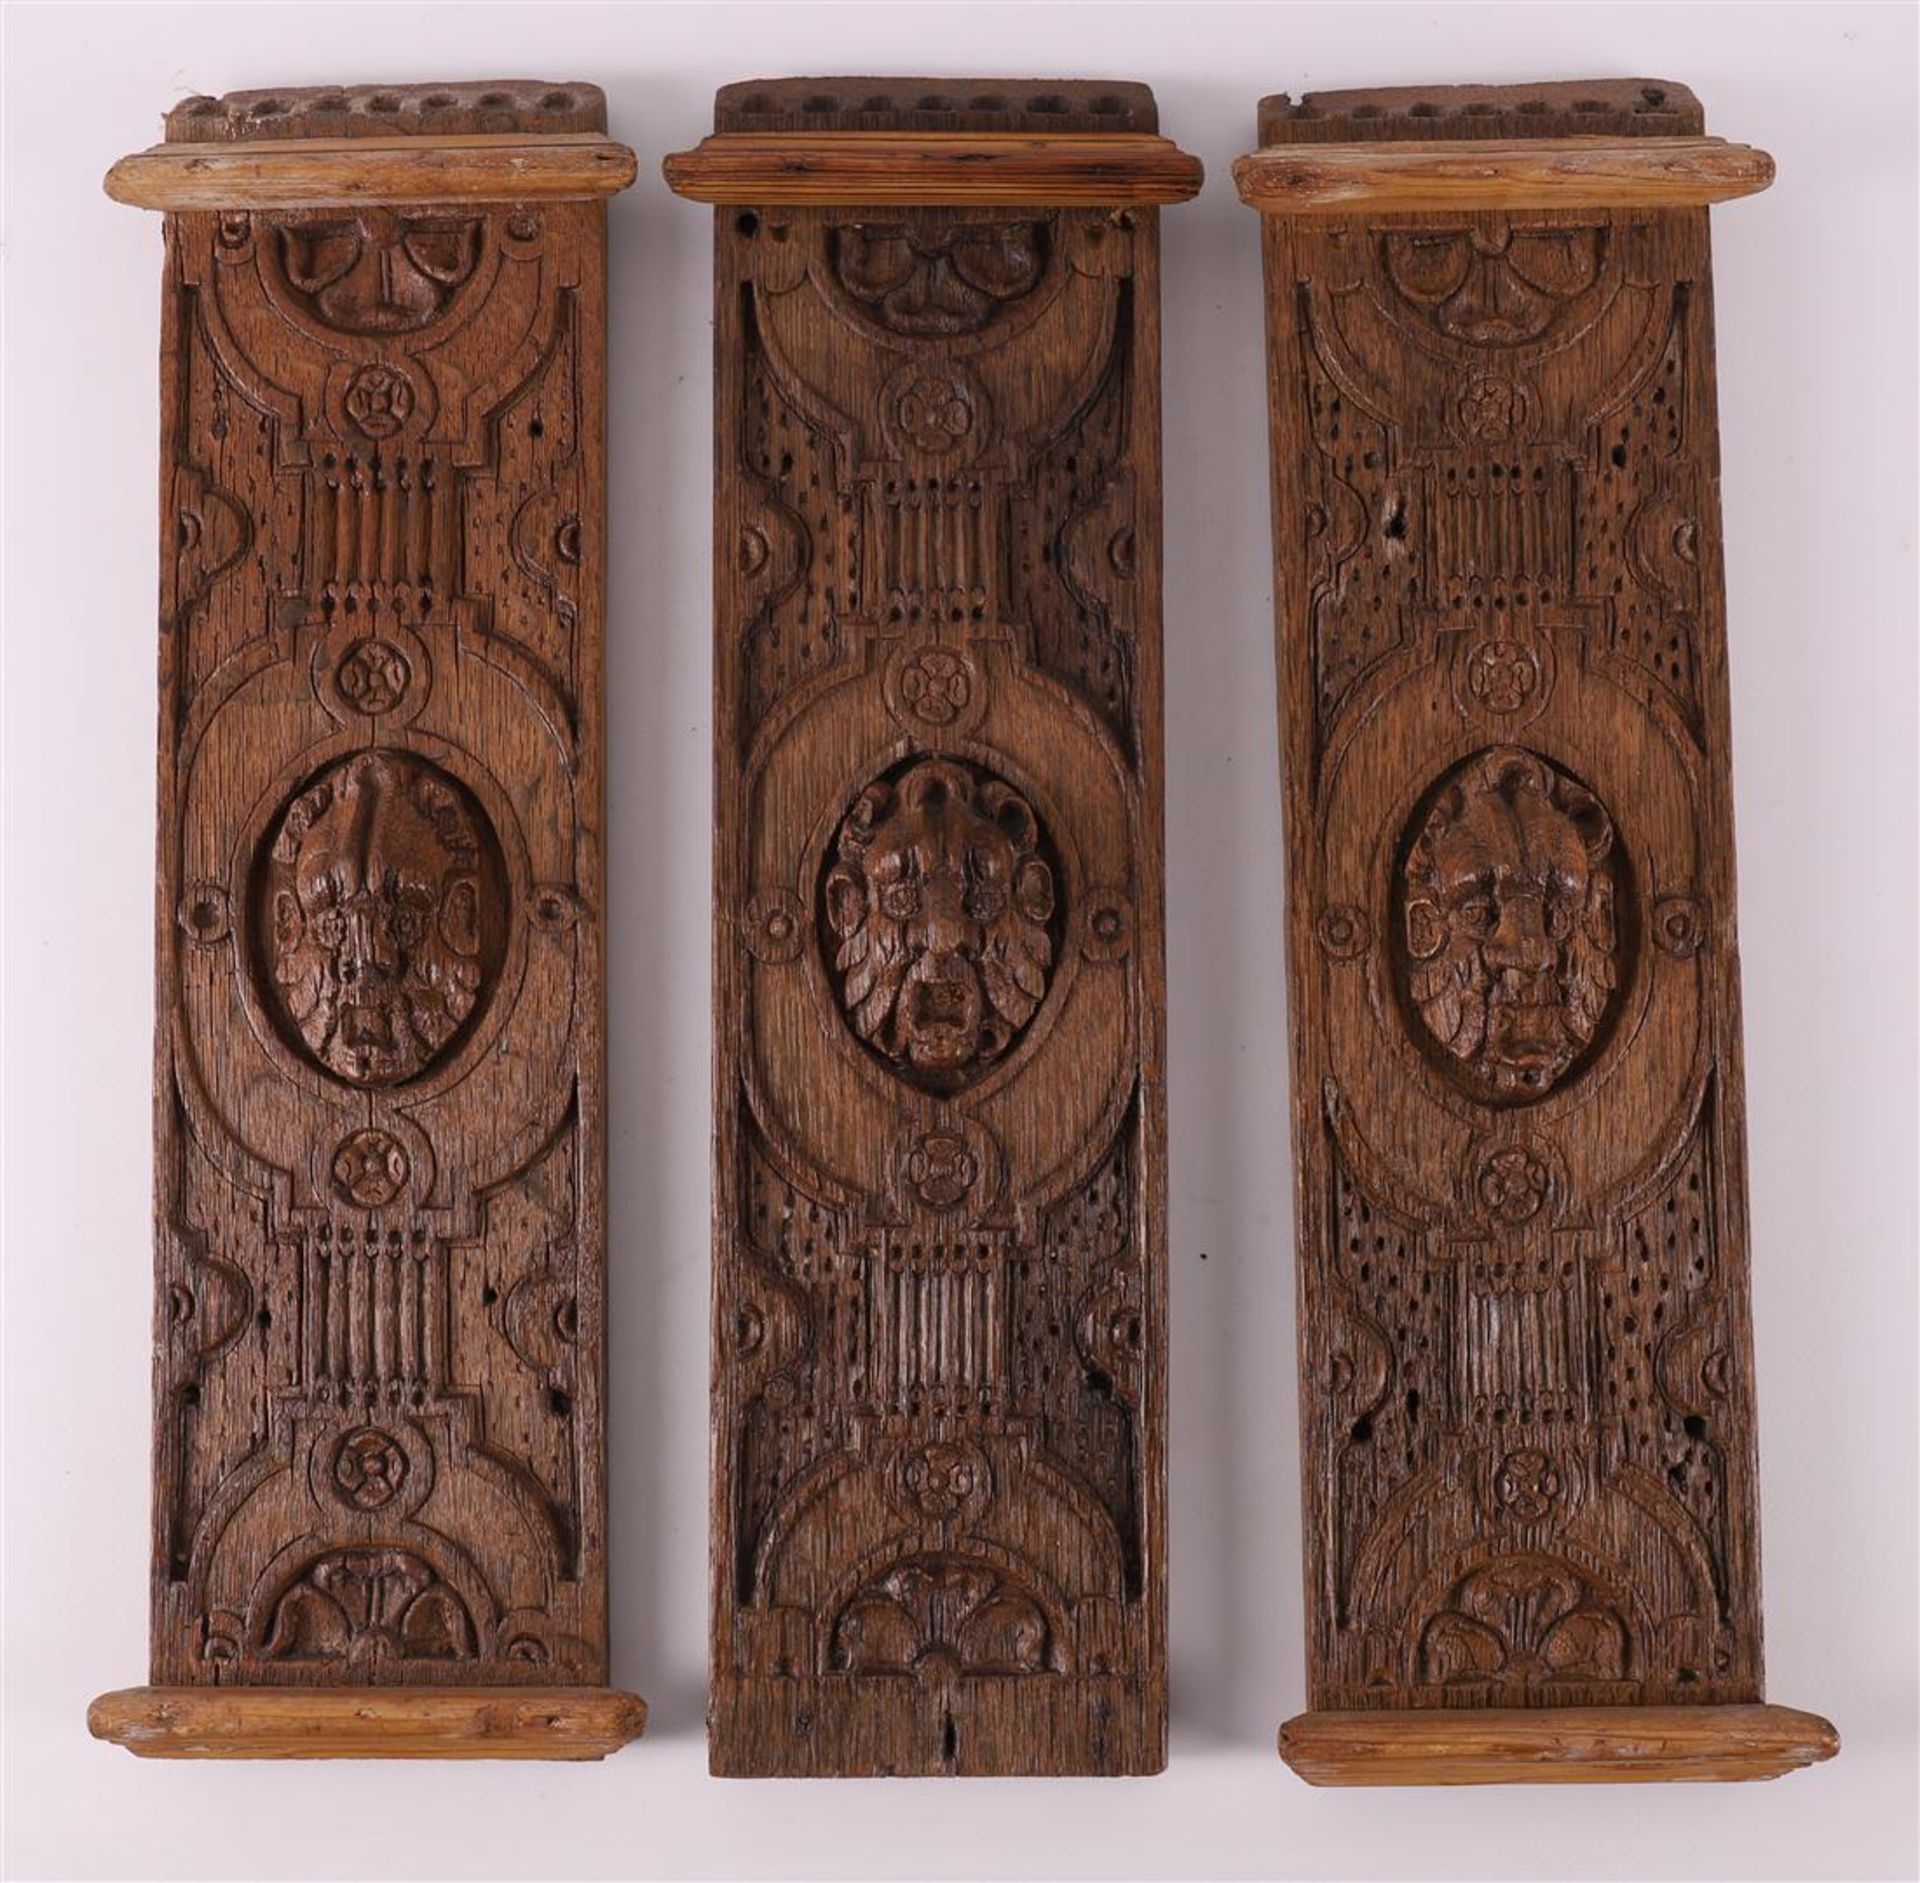 Two carved wooden rosettes of ringed lion heads, 18th century - Image 4 of 5